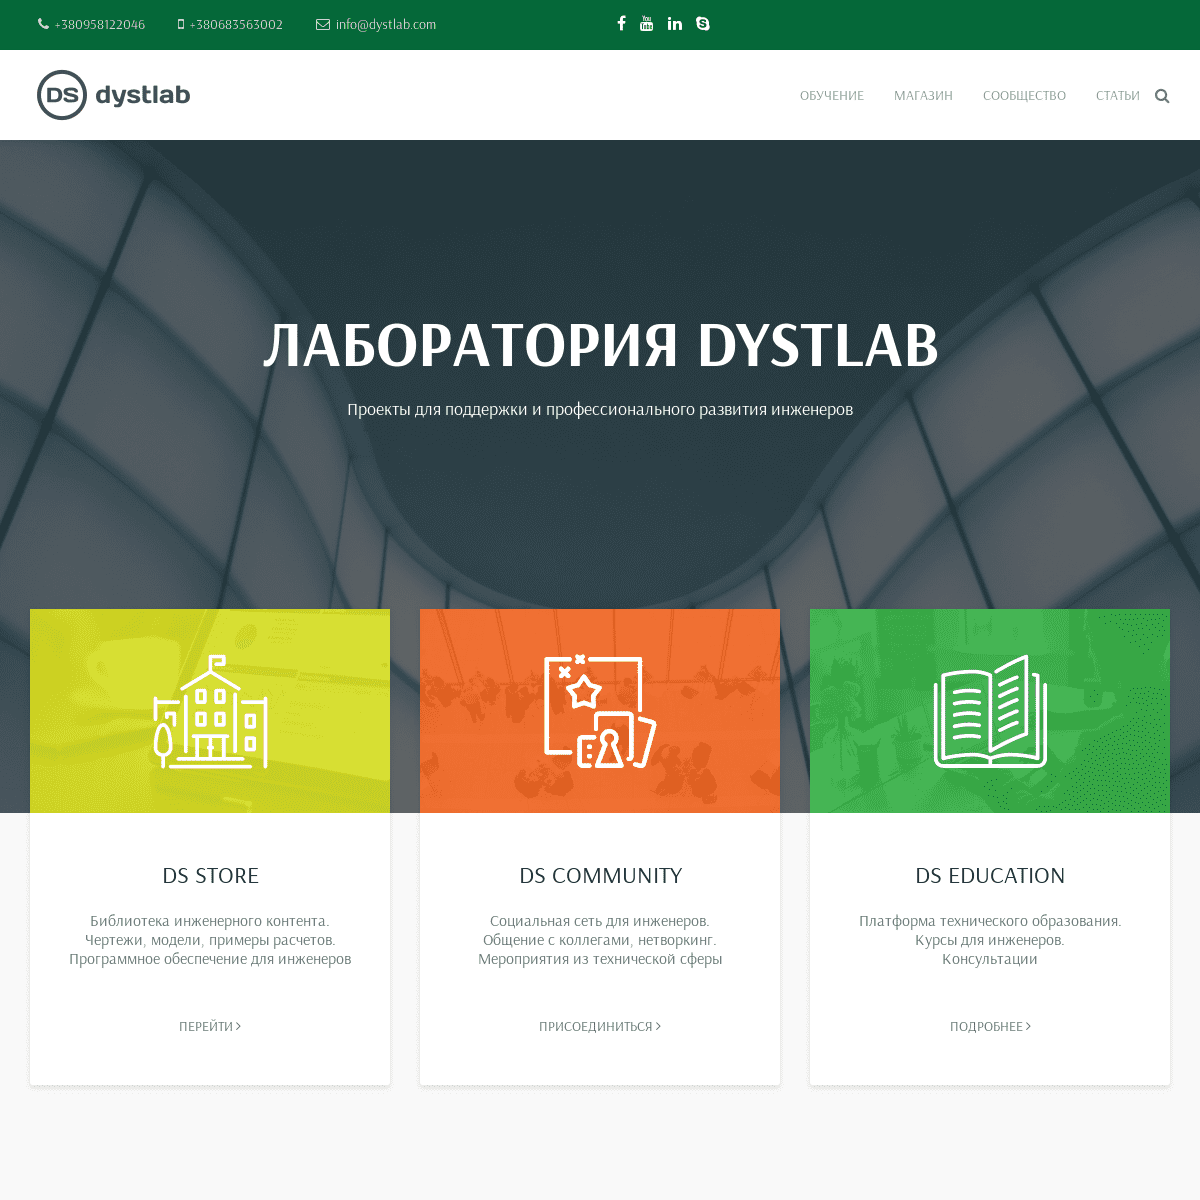 Welcome to Dystlab!